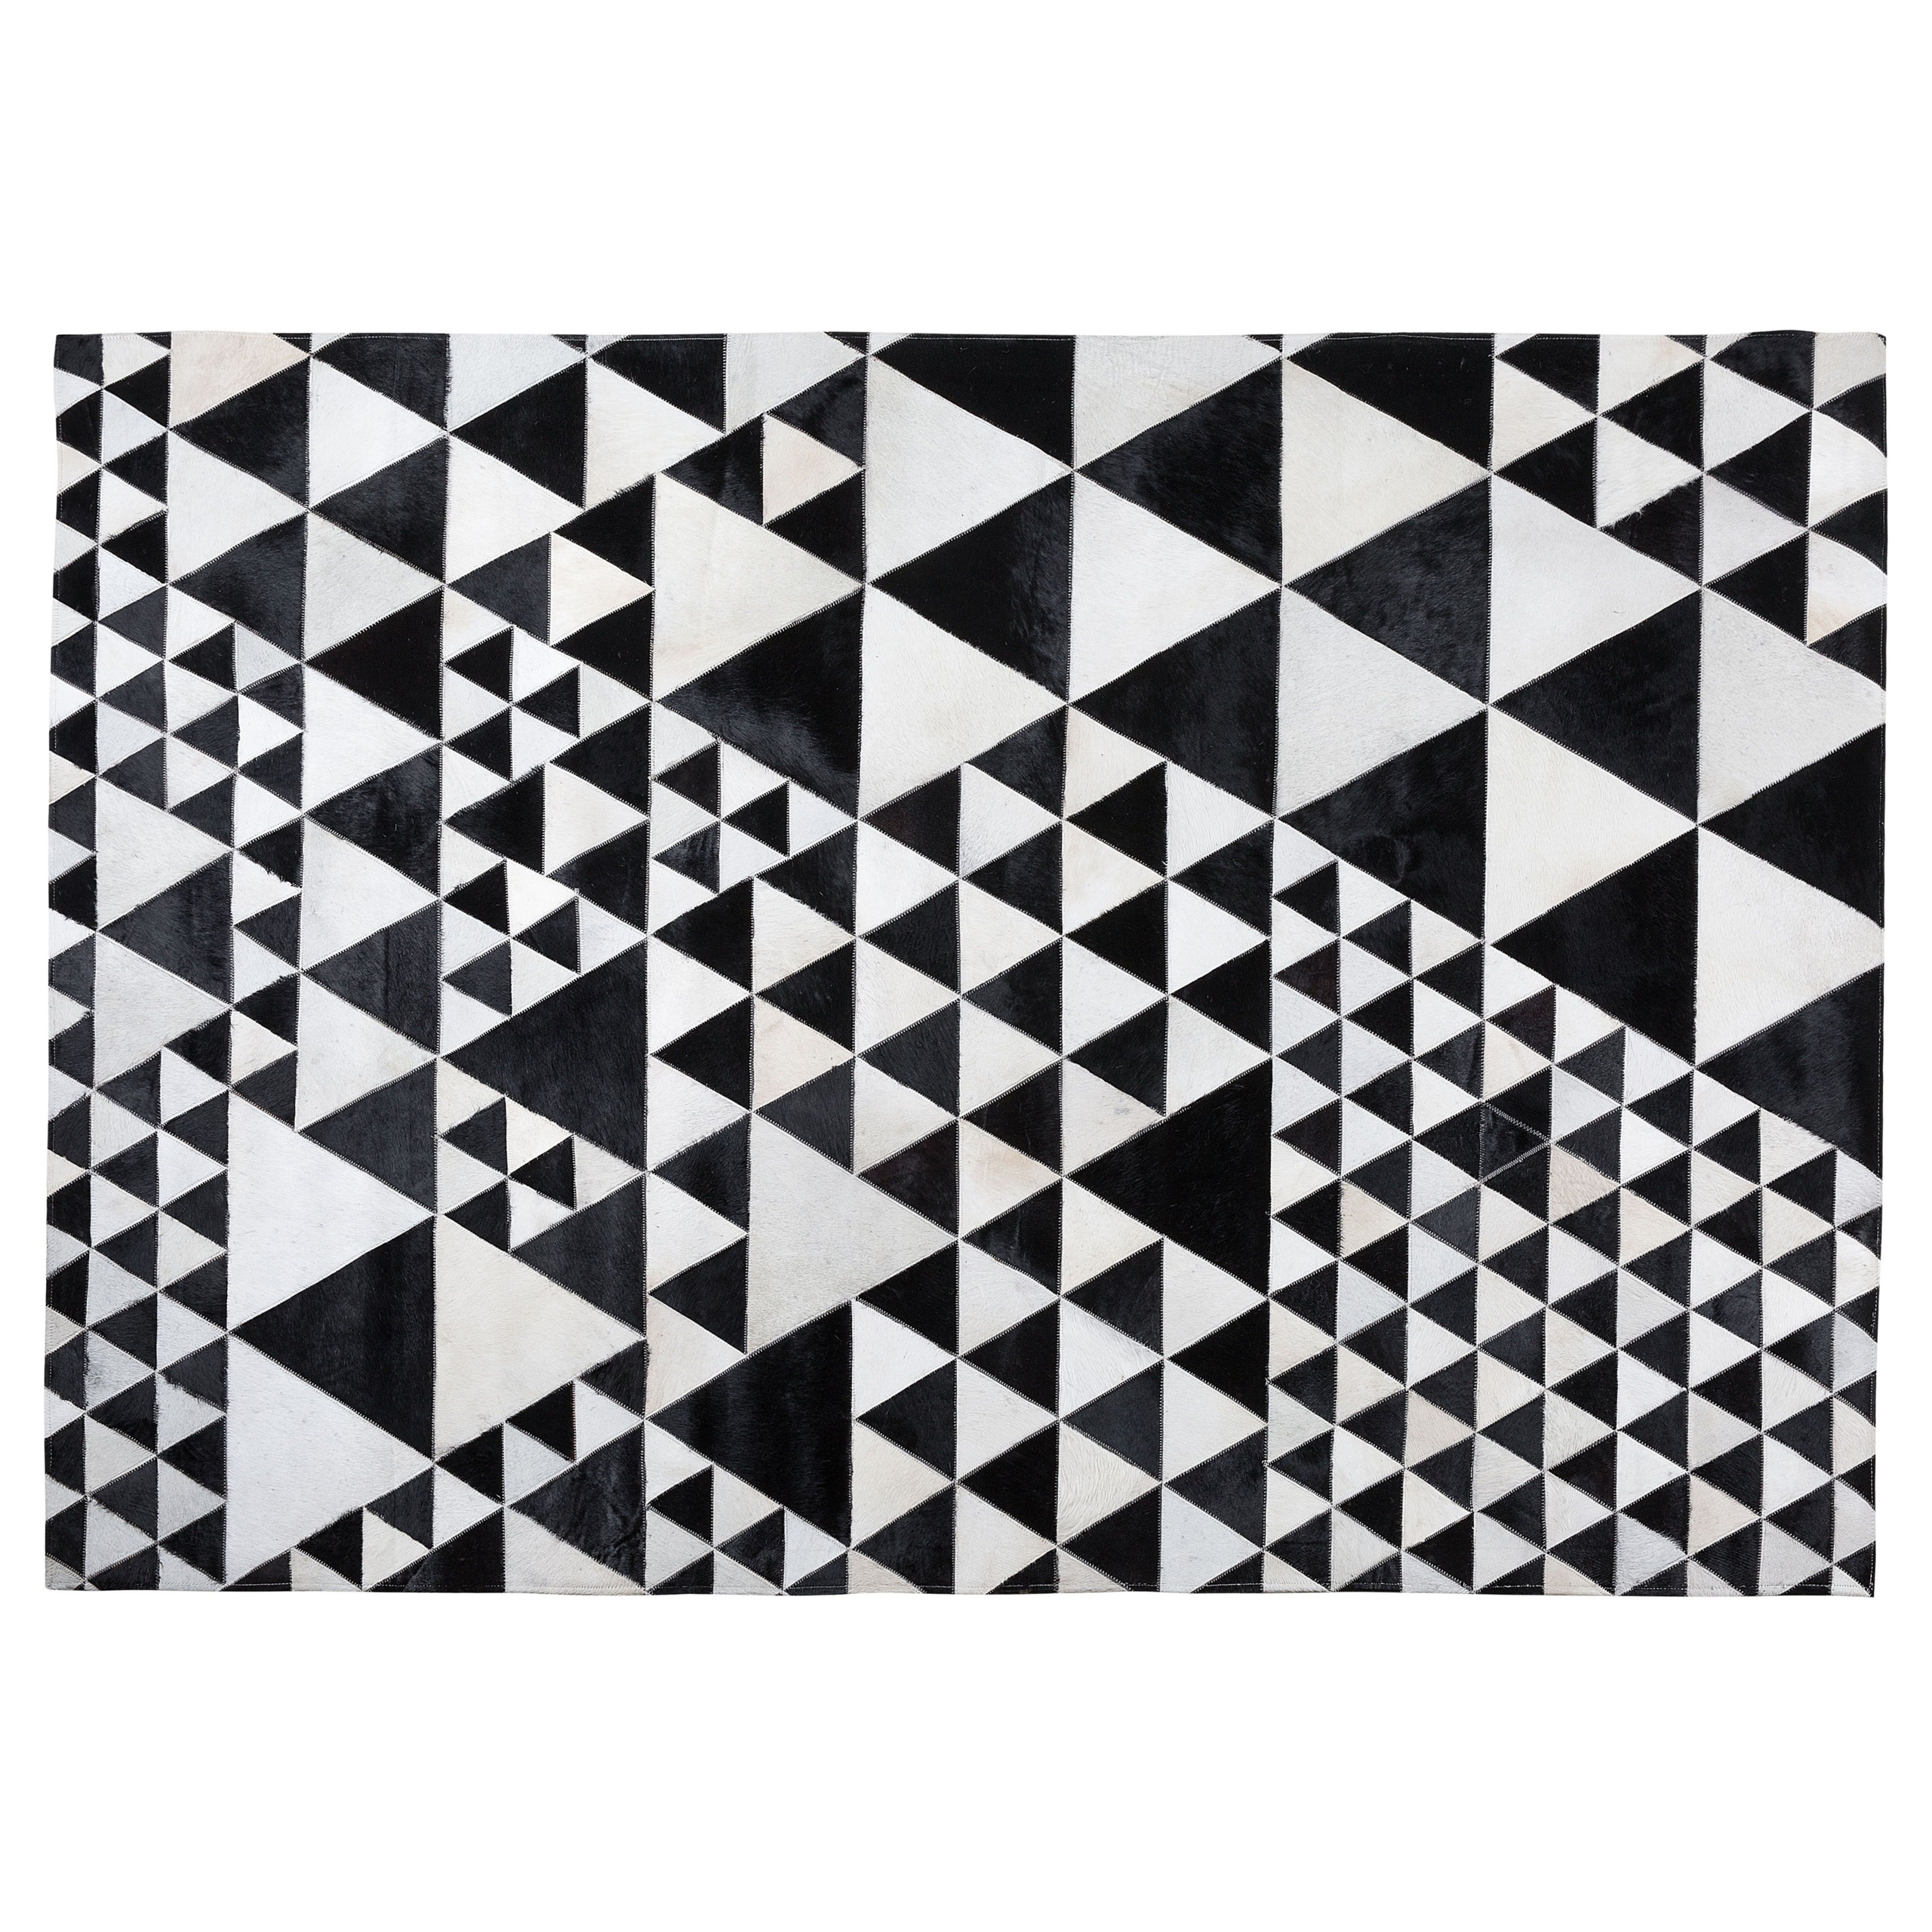 Beliani Rug Black and White Leather 140 x 200 cm Handcrafted Modern